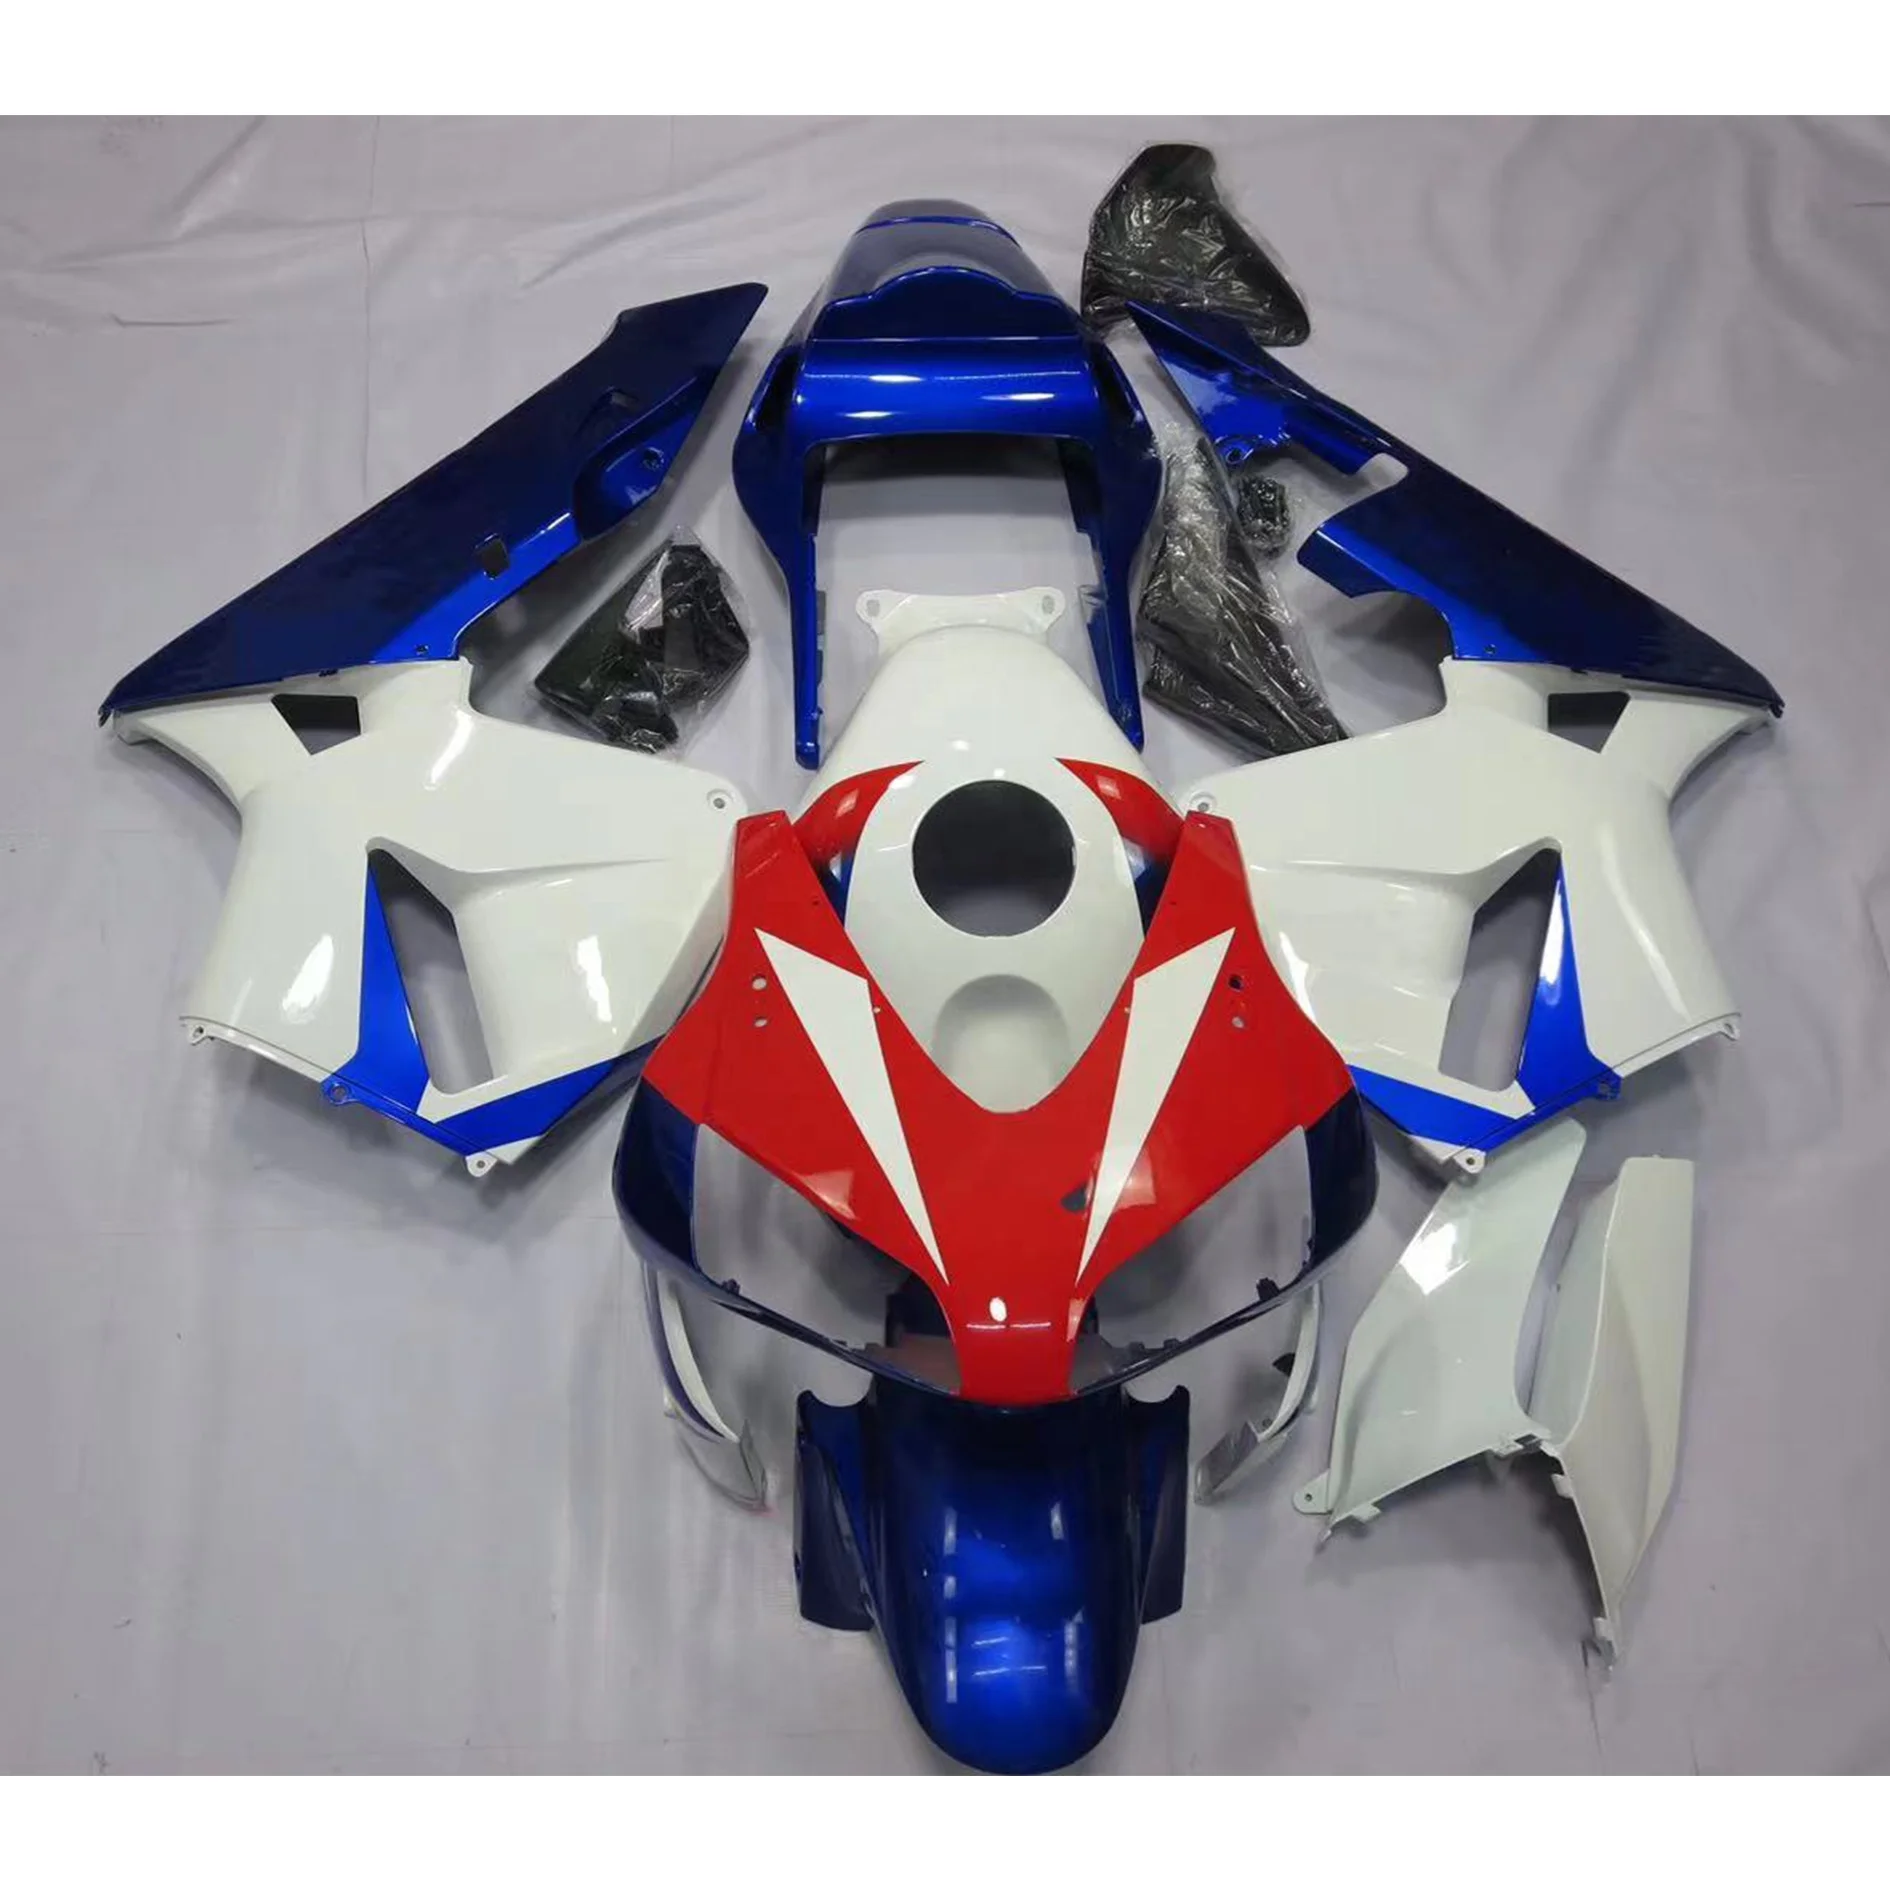 

2022 WHSC Red Blue White OEM Motorcycle Accessories For HONDA CBR600 RR 2003-2004 03 04 Motorcycle Body Systems Fairing Kits, Pictures shown